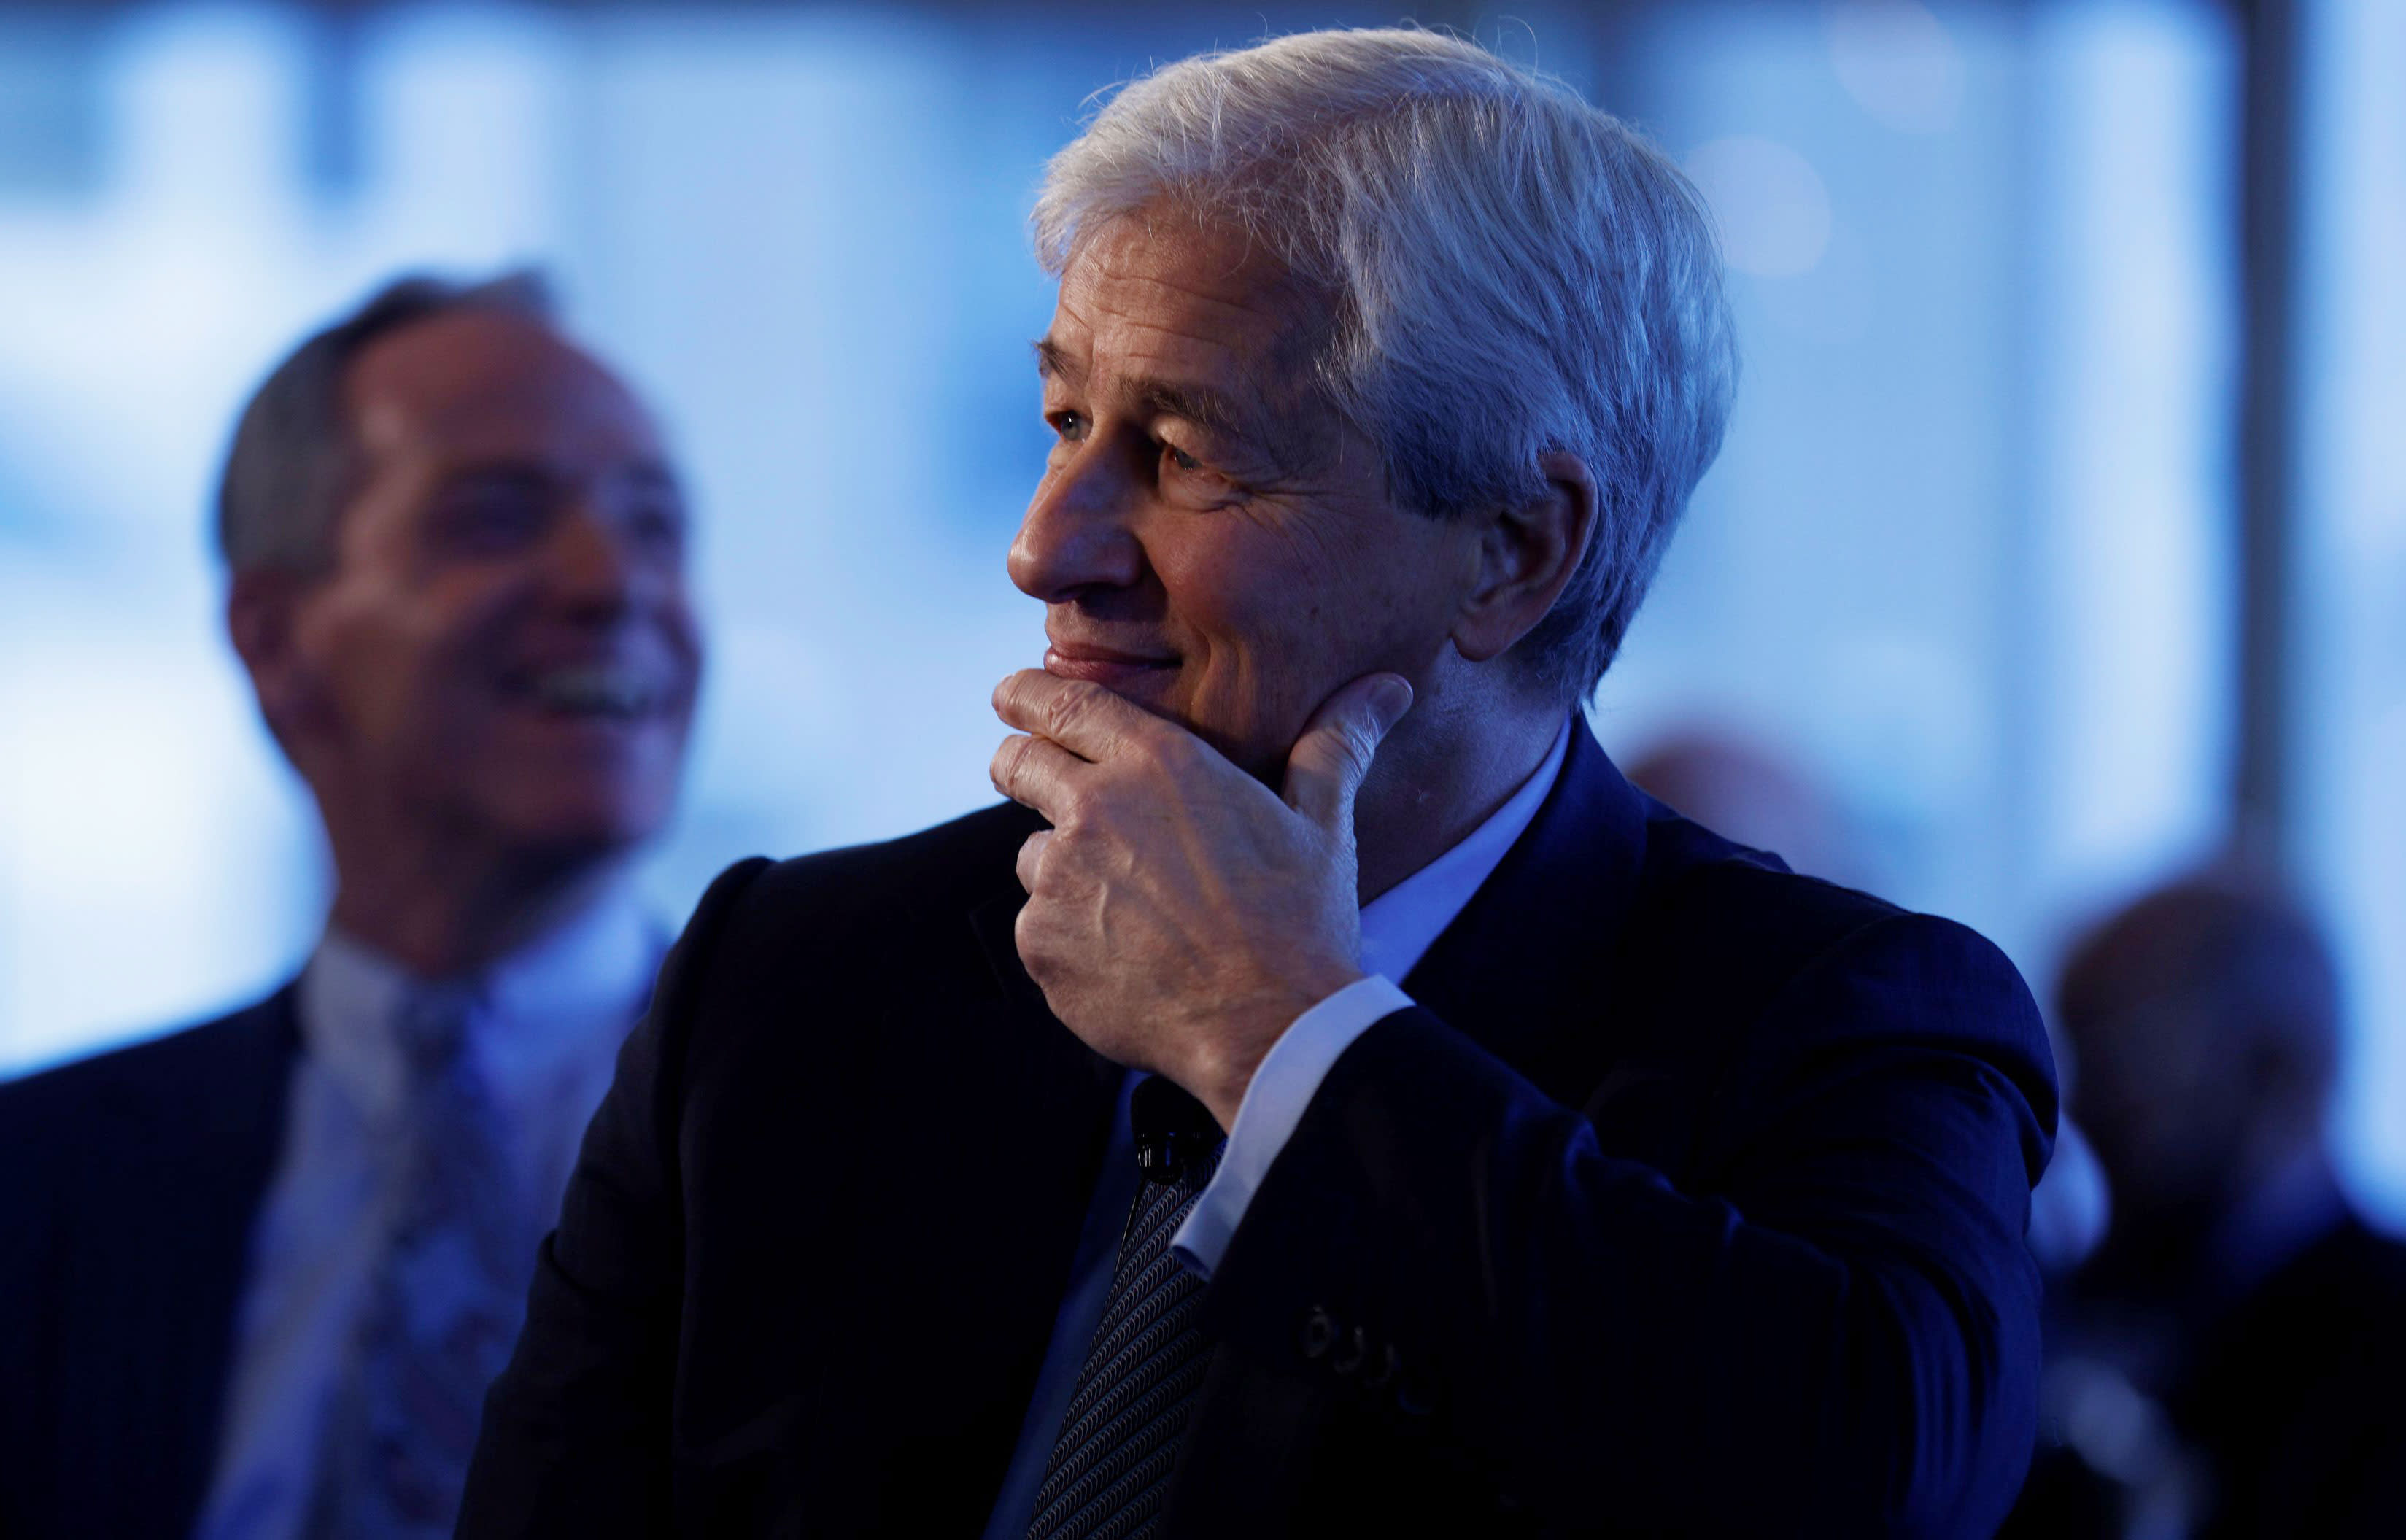 JPMorgan Chase is set to report fourth-quarter earnings – here’s what the Street expects